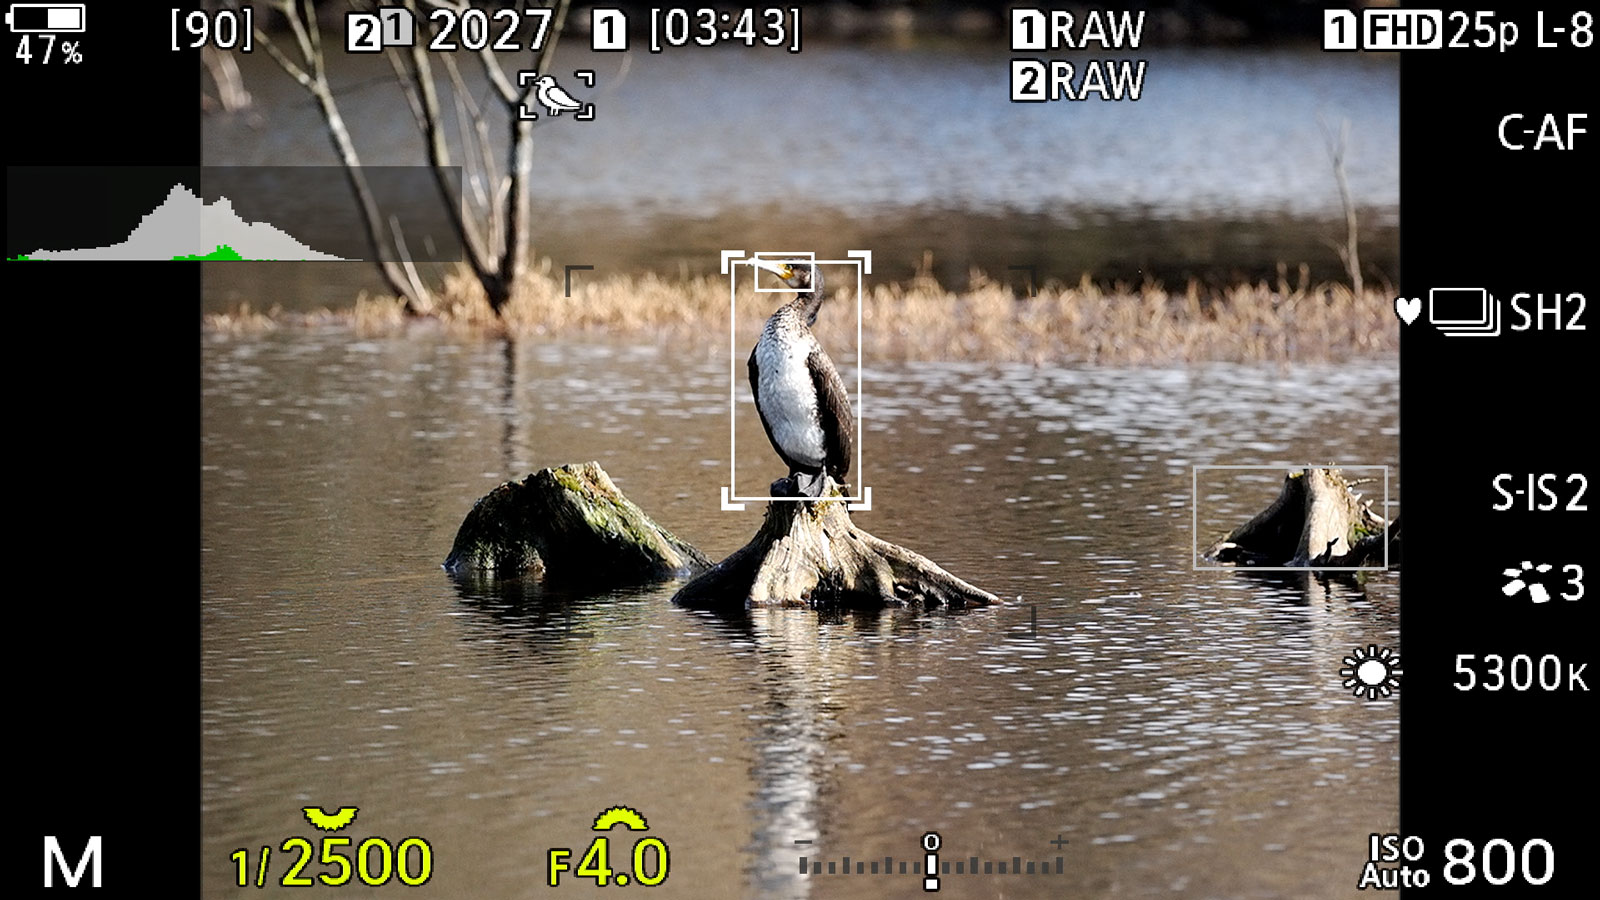 live view screen of the OM-1, showing bird detection on a cormorant